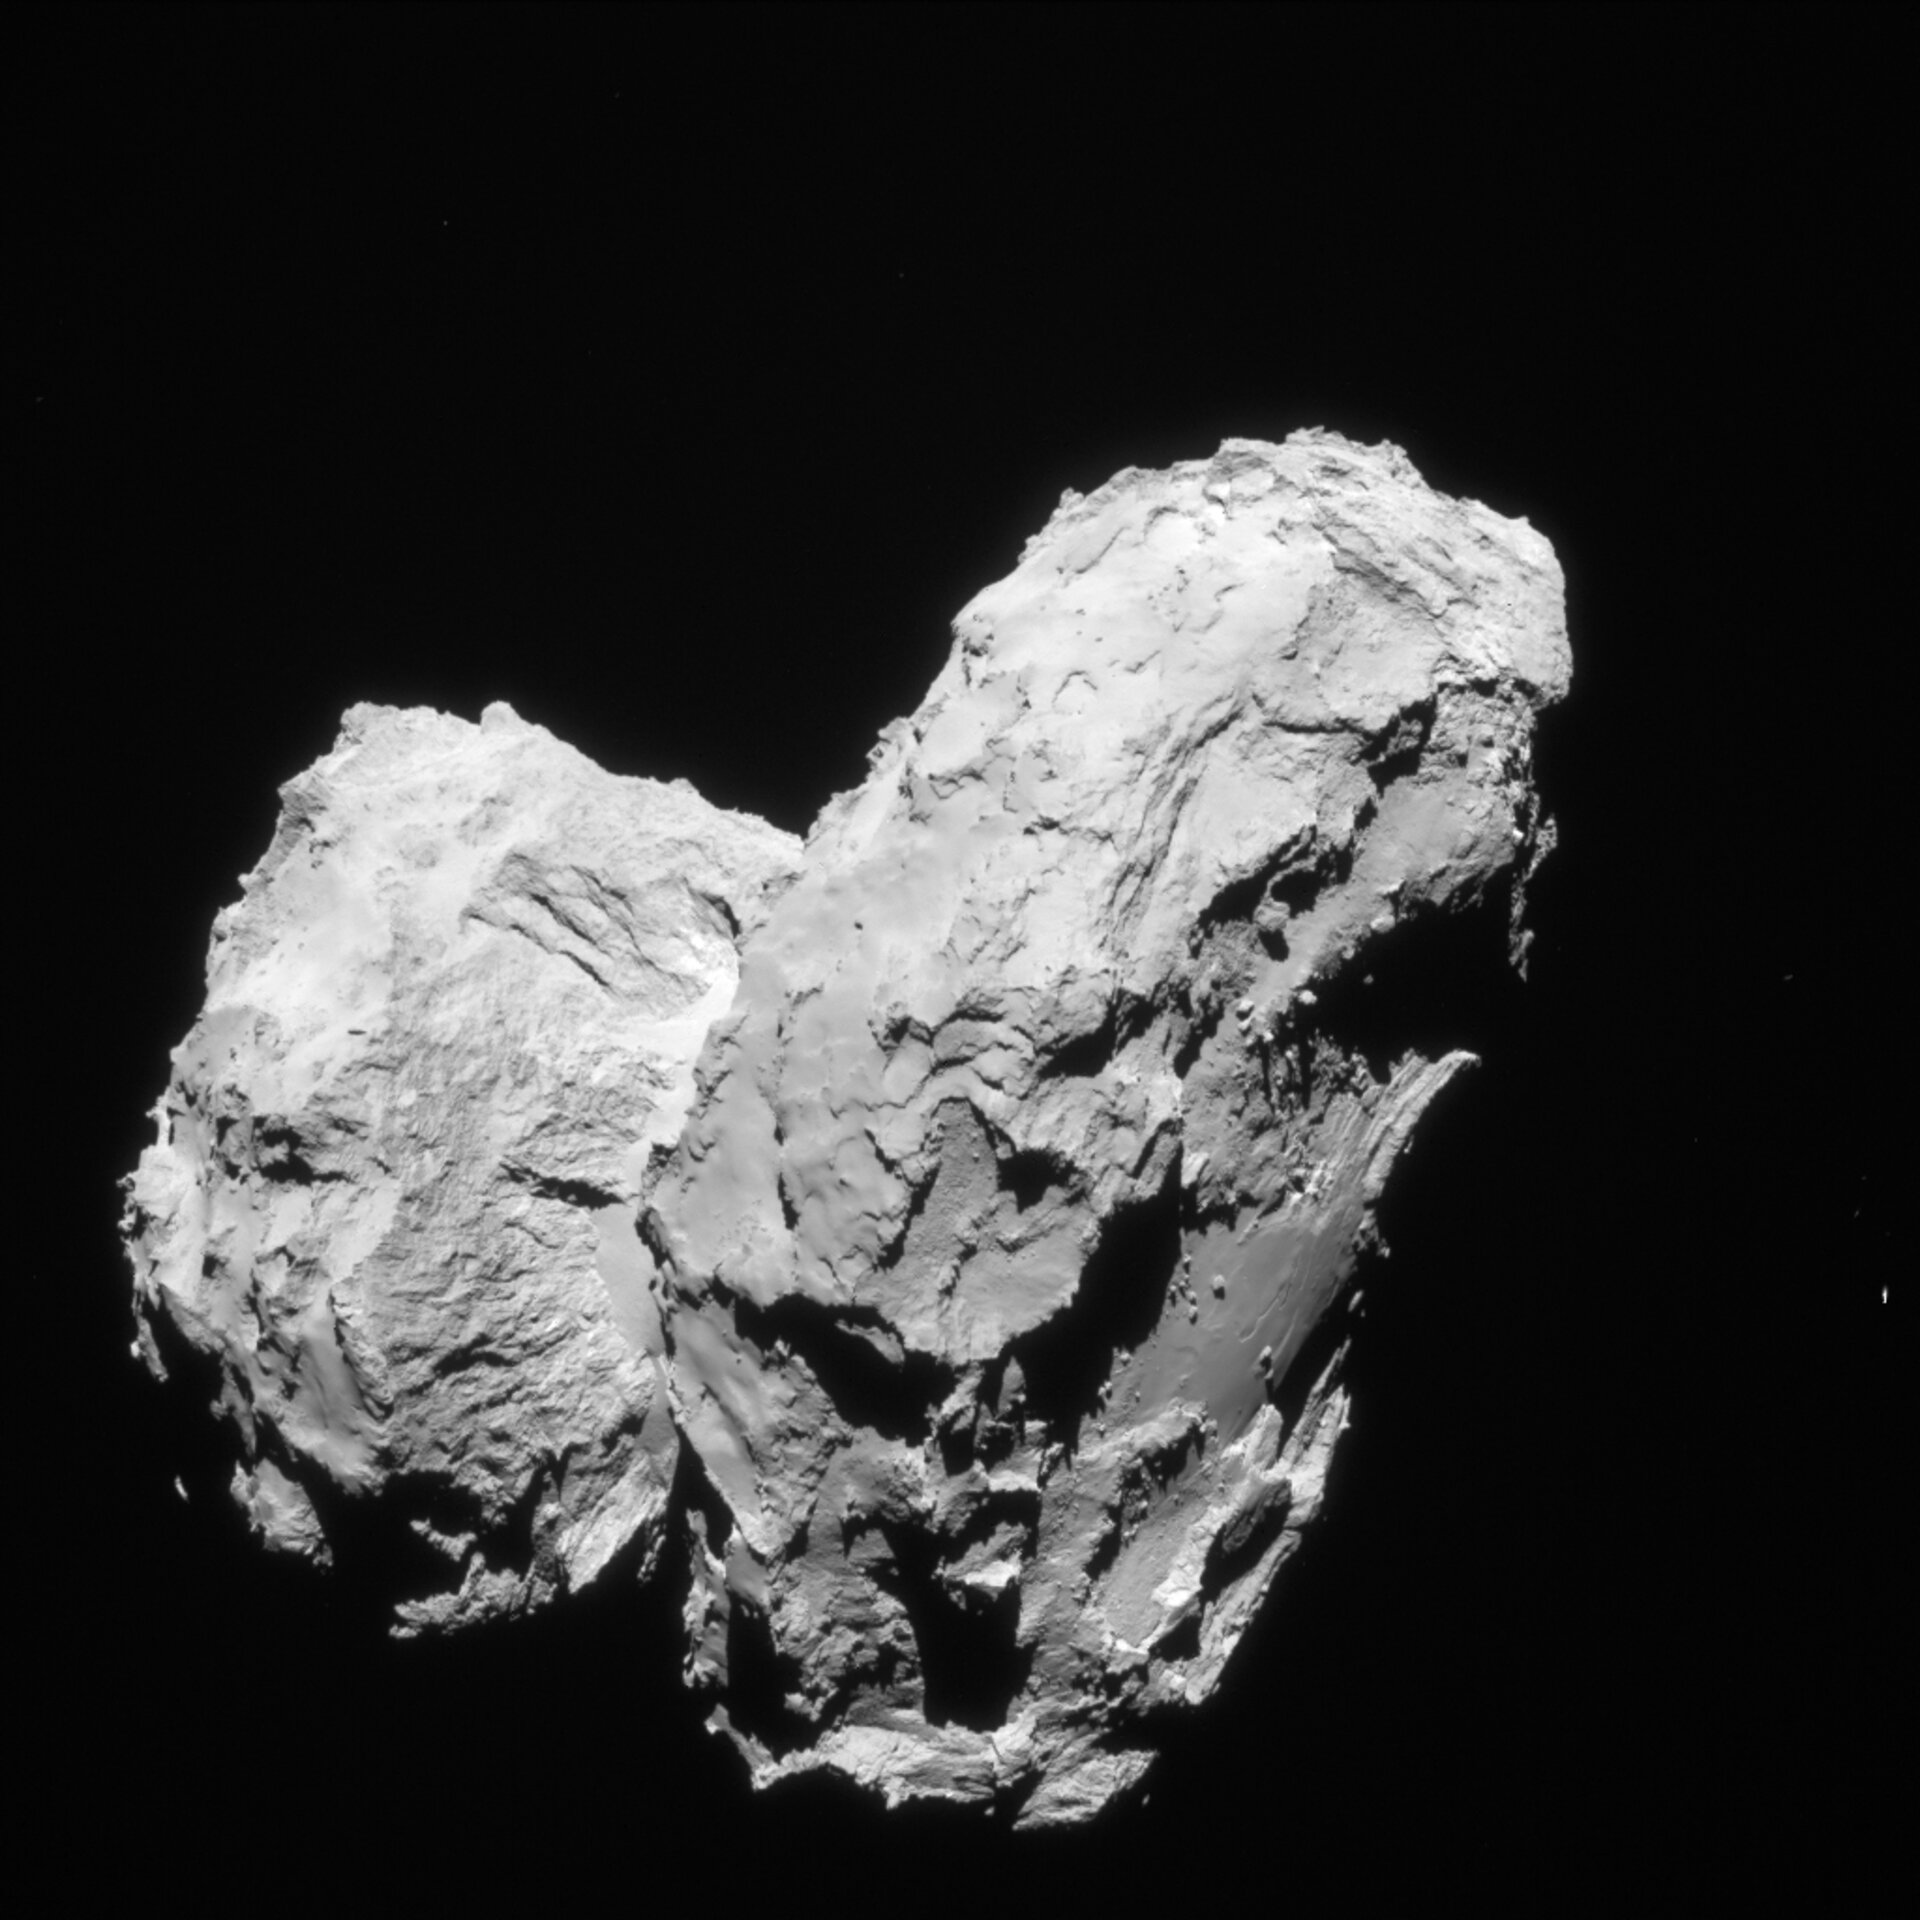 Year at a comet, August 2014